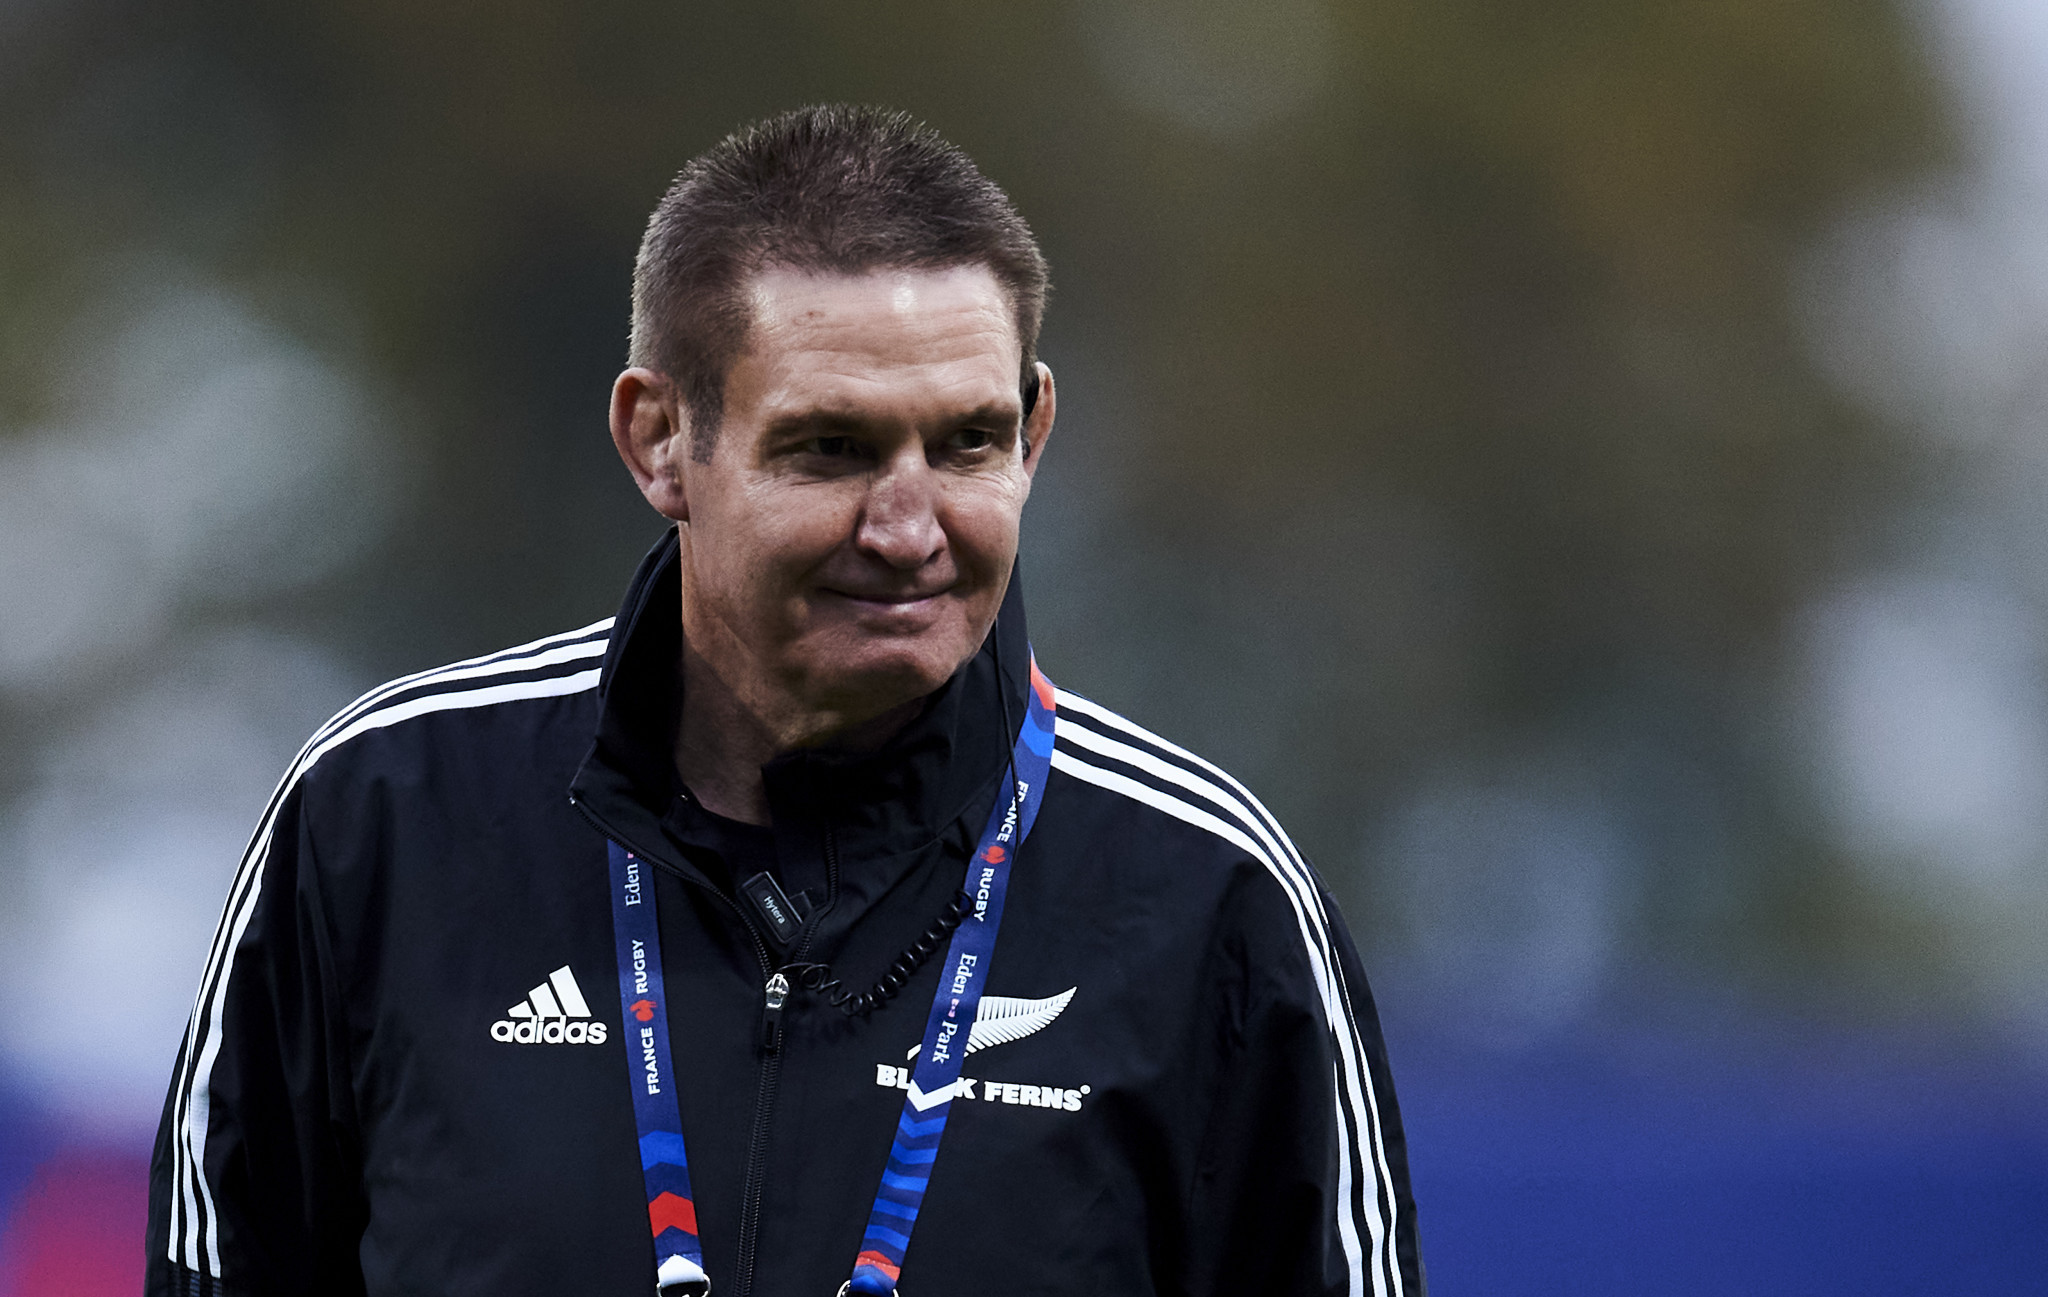 New Zealand head coach Glenn Moore said he was committed to taking learnings on board ©Getty Images